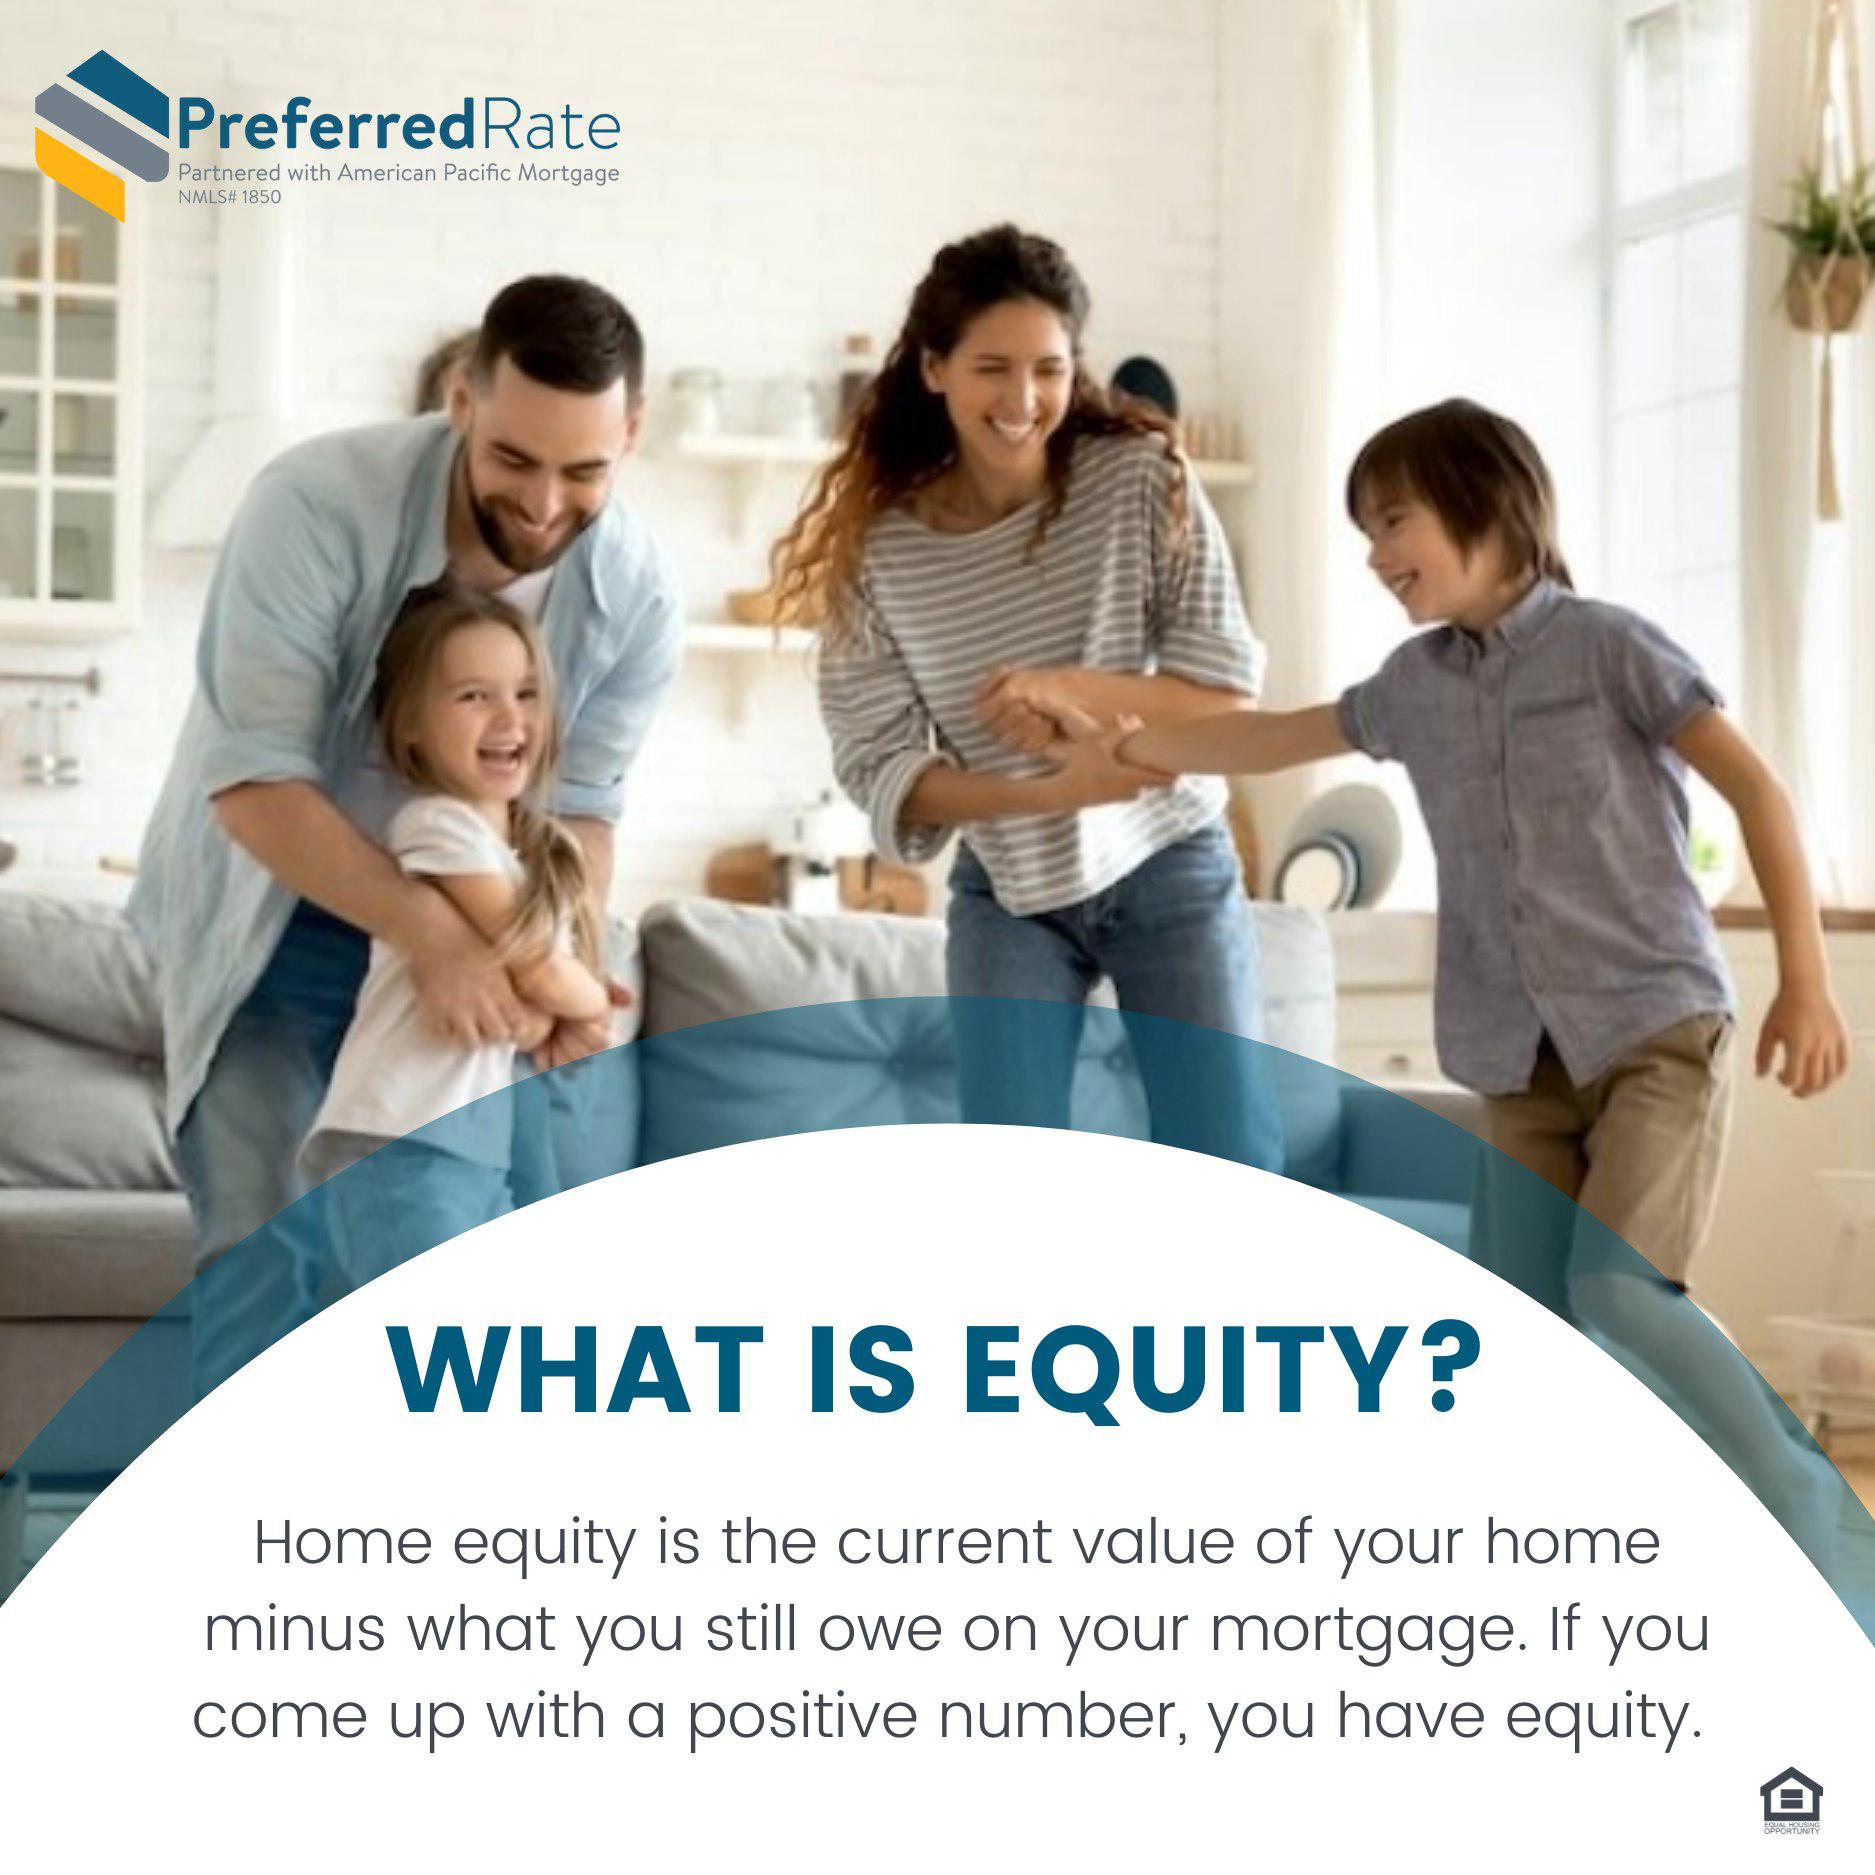 Equity reveals the portion of the property value that you can rightfully claim as your own. If you a Sergio Giangrande - Preferred Rate Oakbrook Terrace (847)489-7742